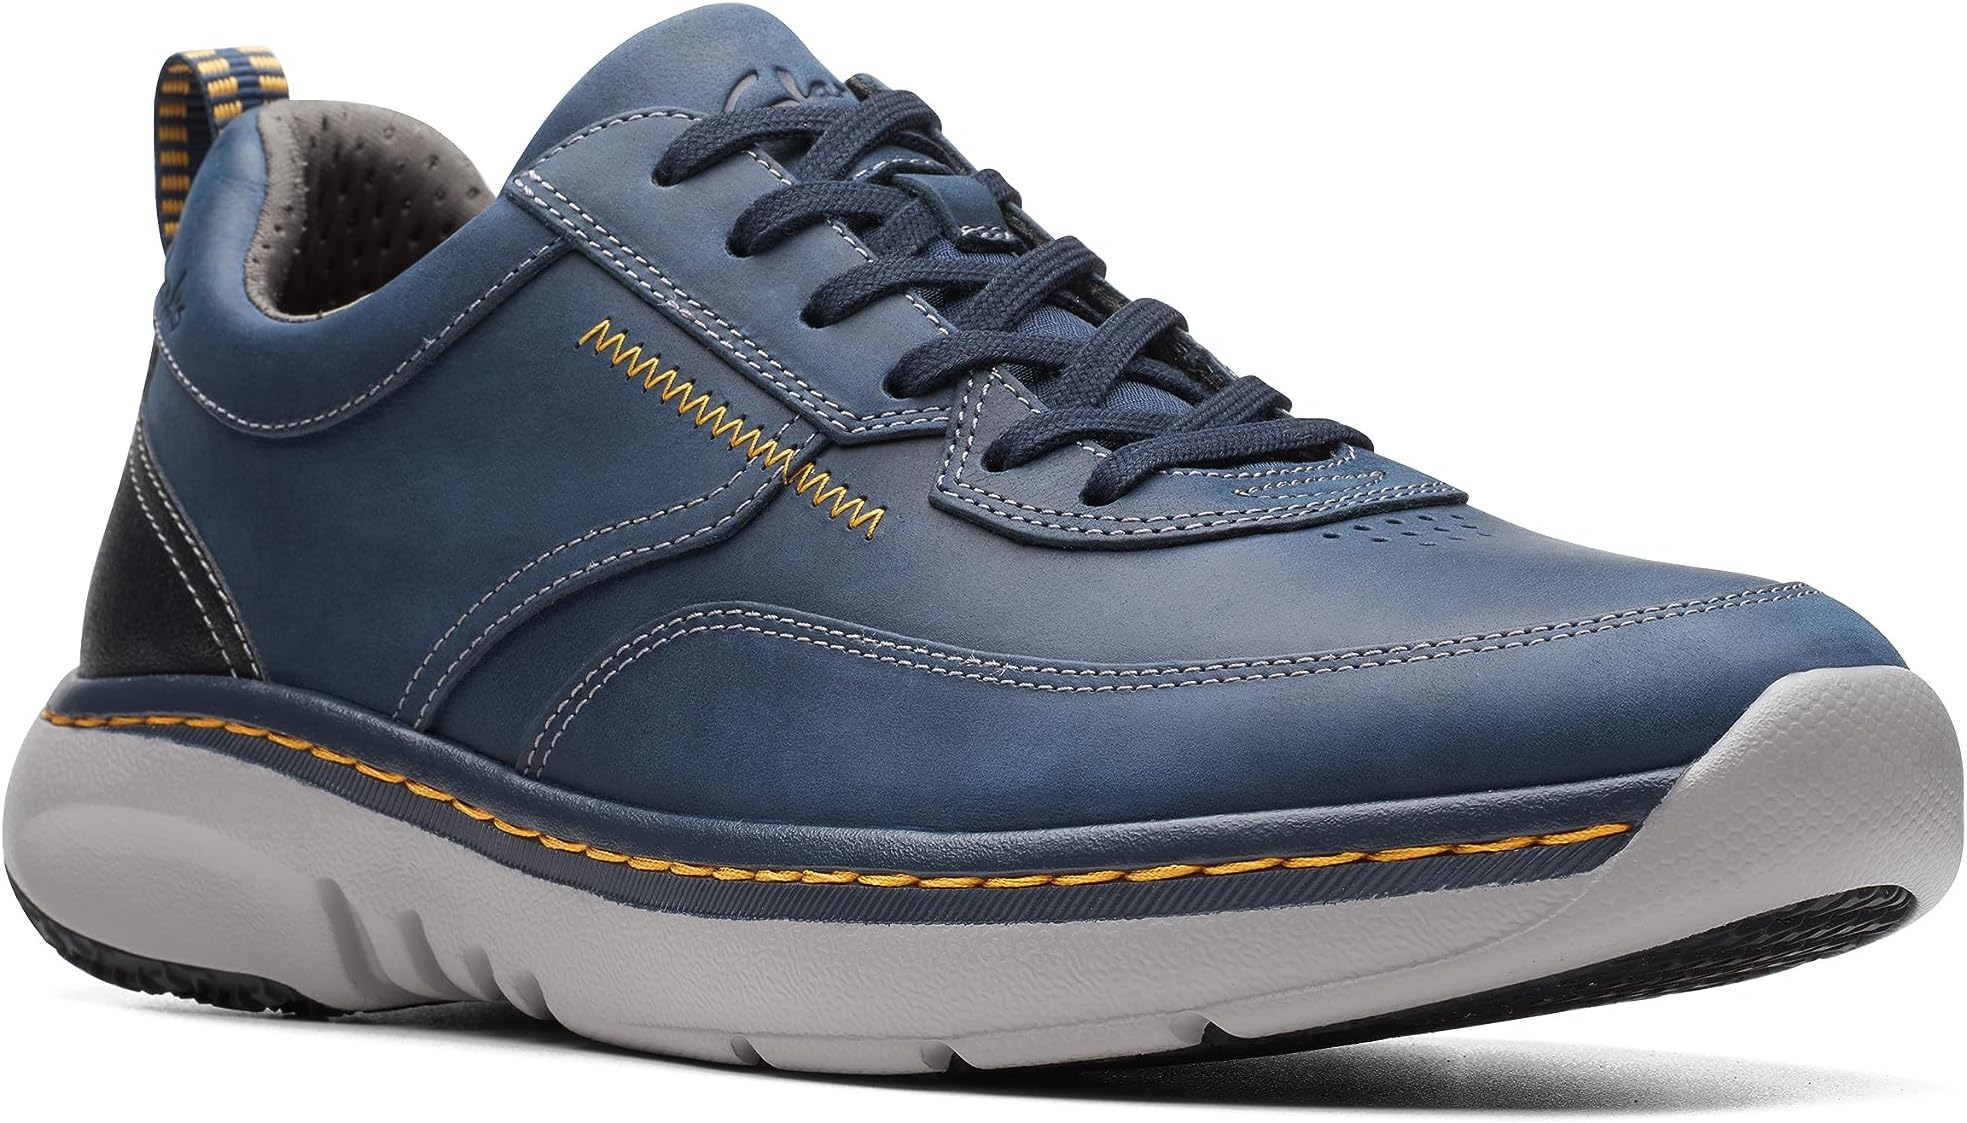 Кроссовки Clarkspro Lace Clarks, цвет Navy Leather кроссовки clarks un costa lace navy